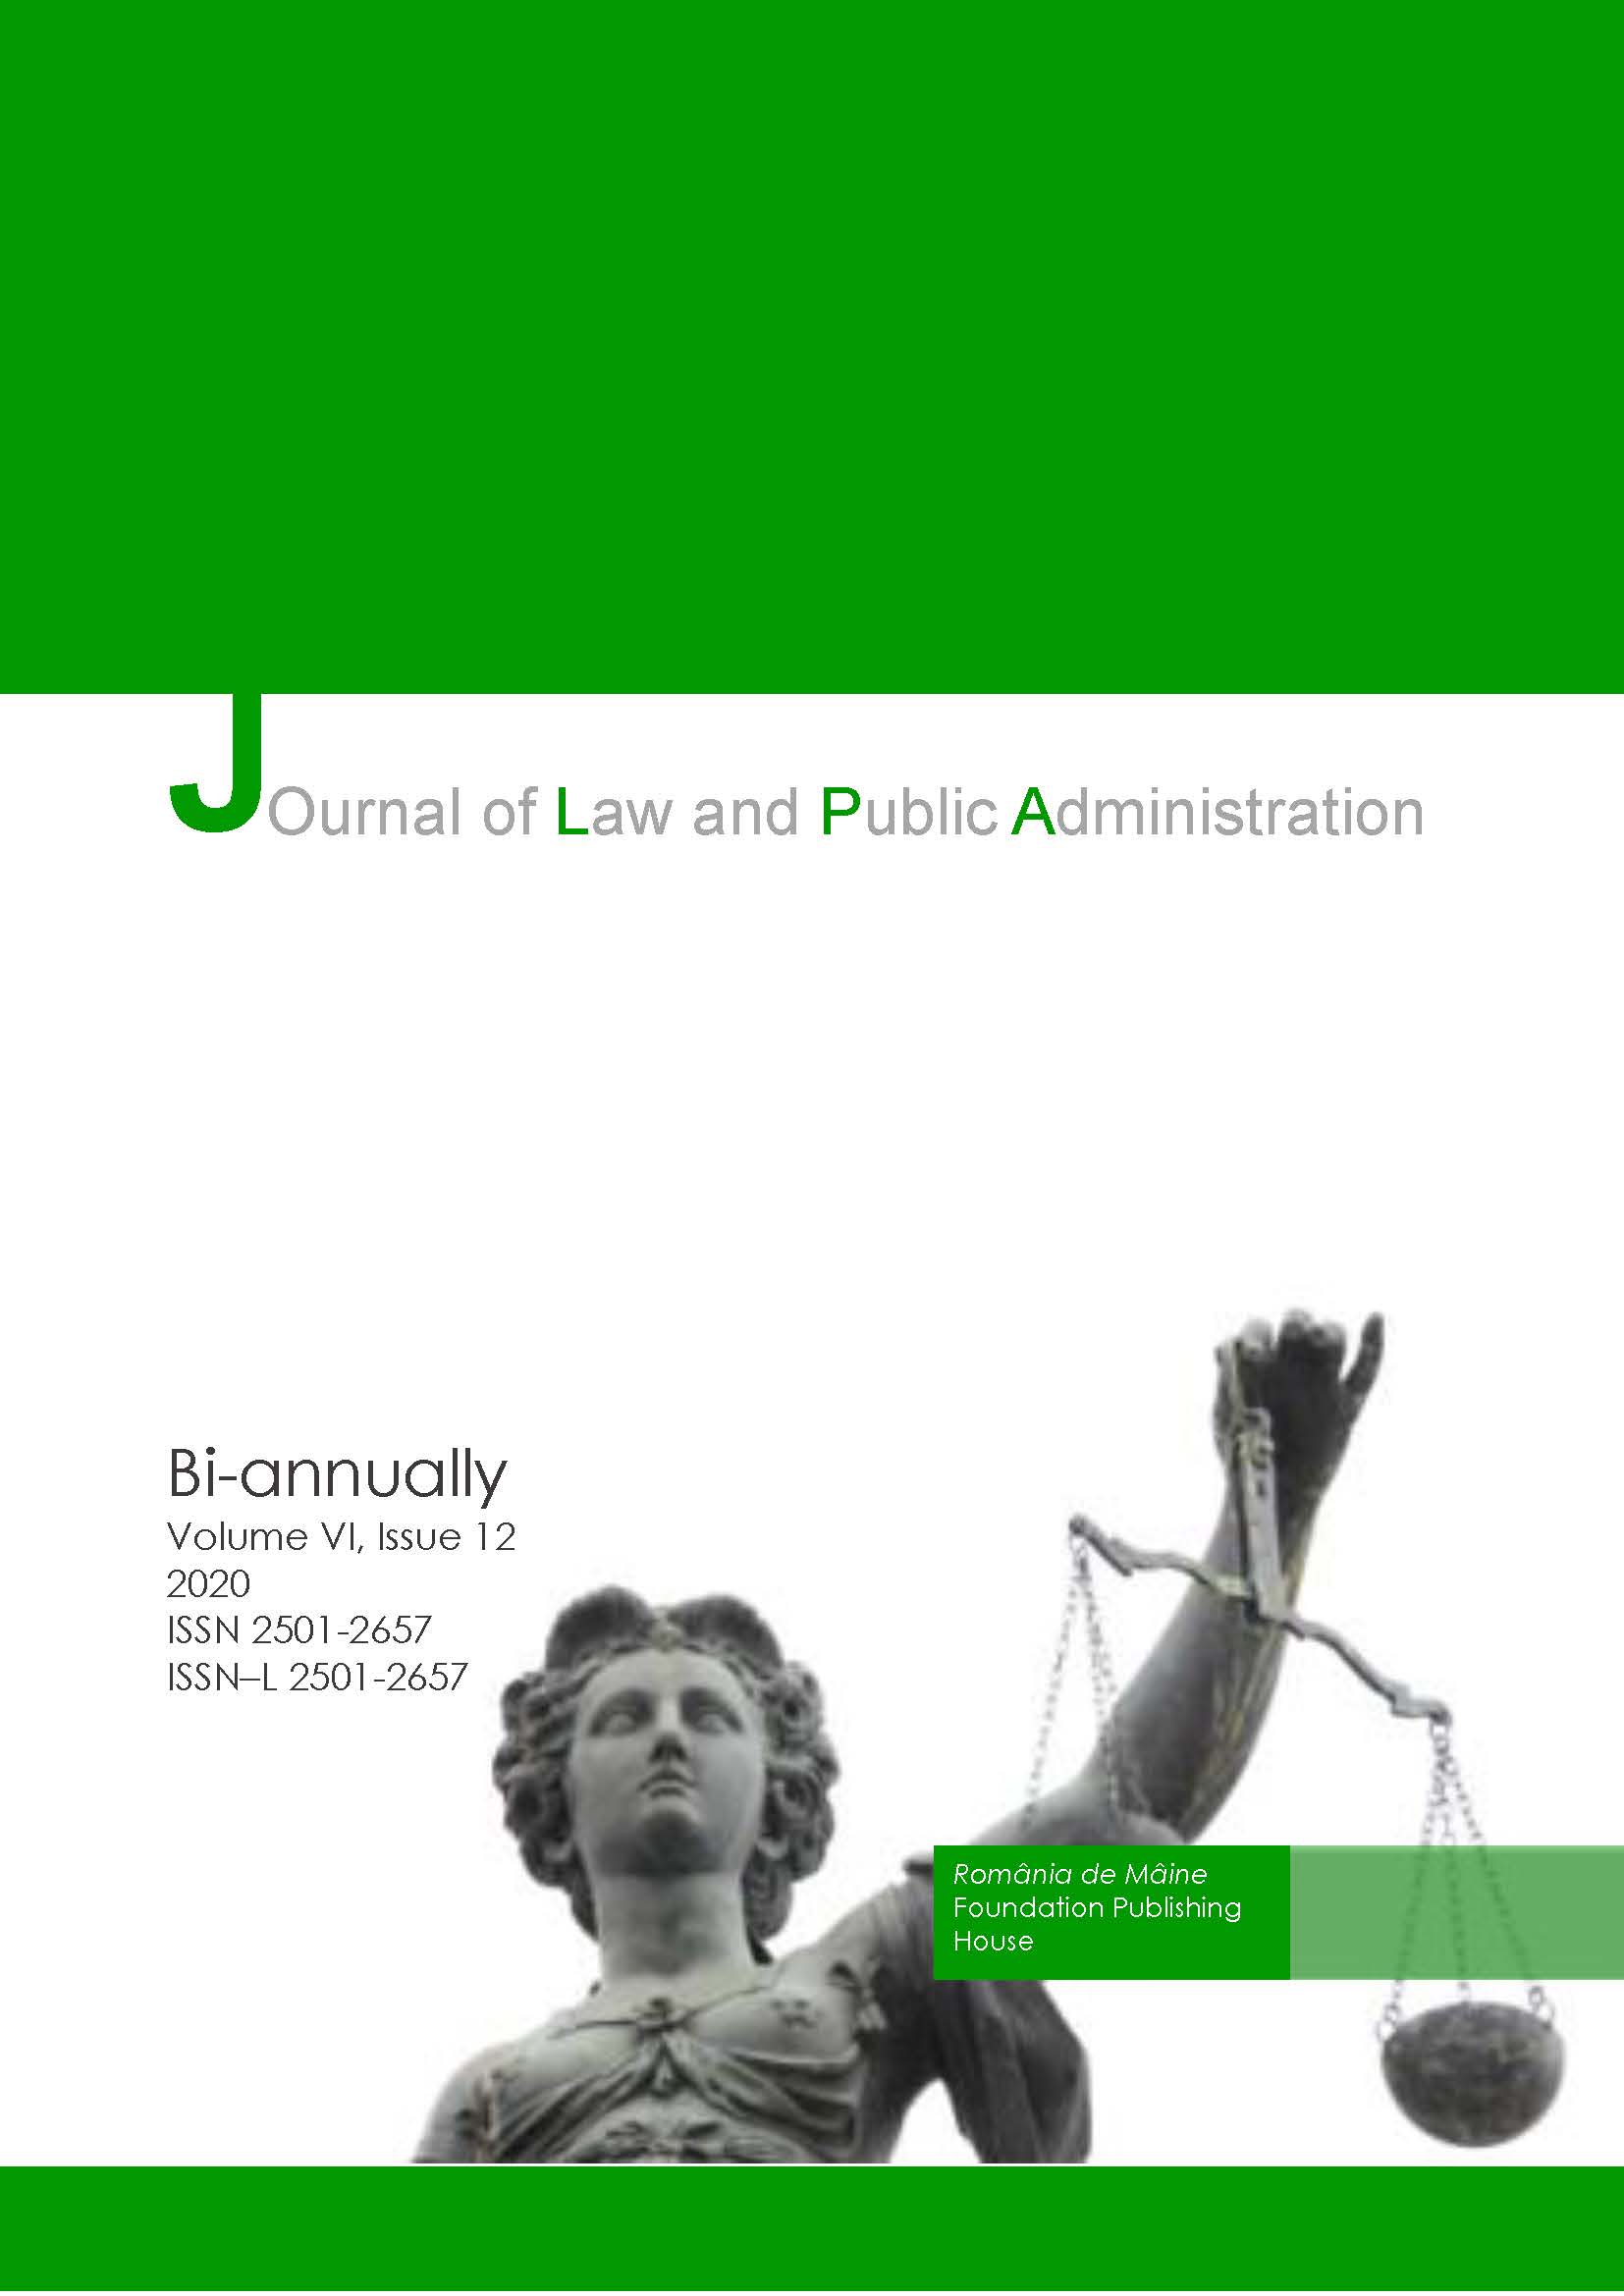 The Normative Inflationary Phenomenon and the Law no. 285/2004 on Copyright and Related Rights